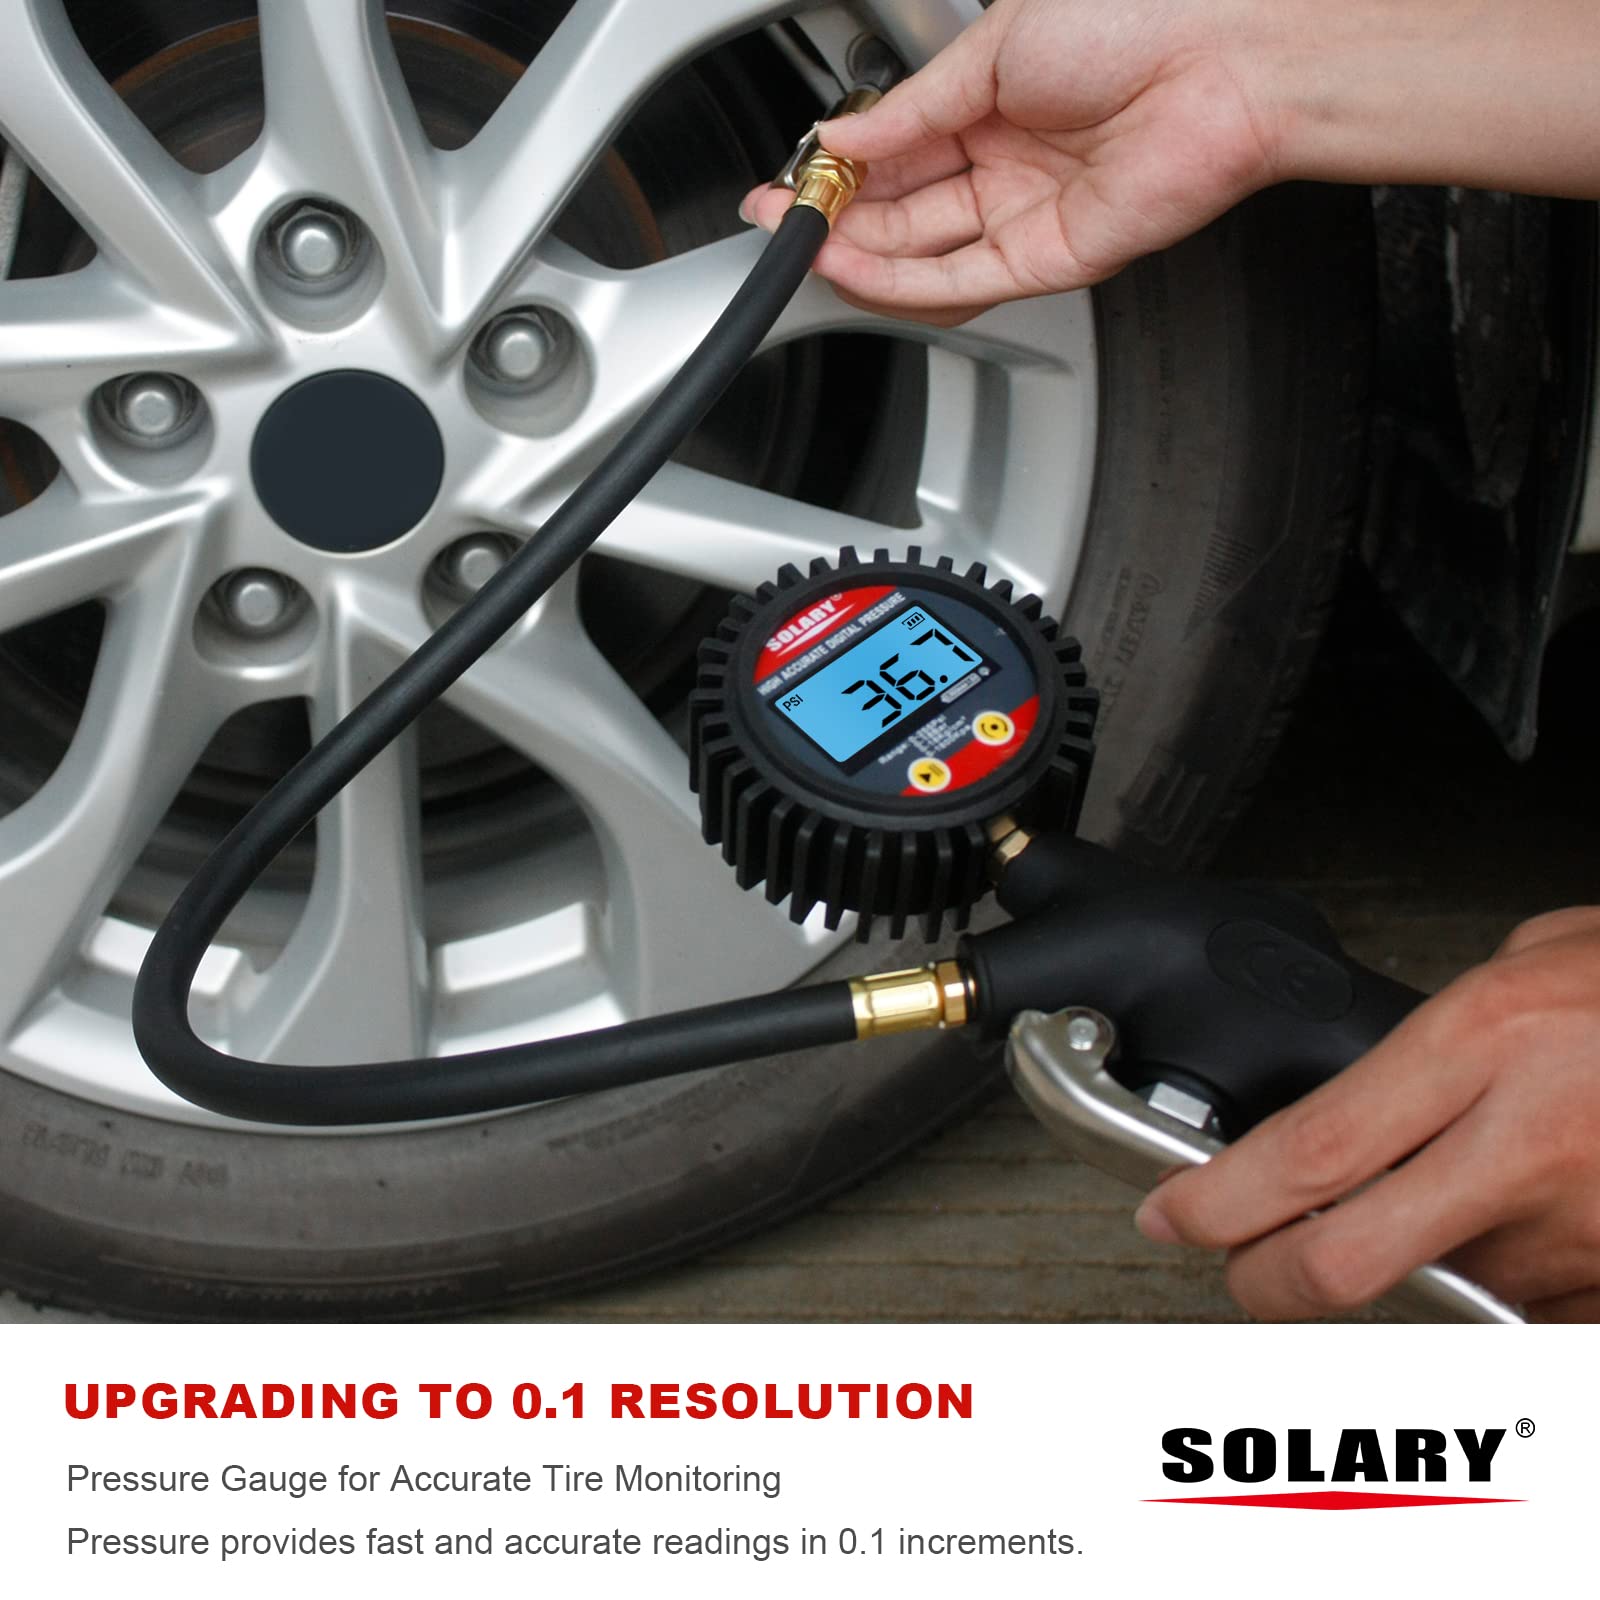 Solary Digital Tire Pressure Gauge Inflator, 250 PSI Heavy Duty Digital Inflation Gauge with Quick Connect Coupler for Car Bike Rv Truck Automobile, Air Compressor Tire Inflator Attachment - Auto Body Collision Repair Welding Products